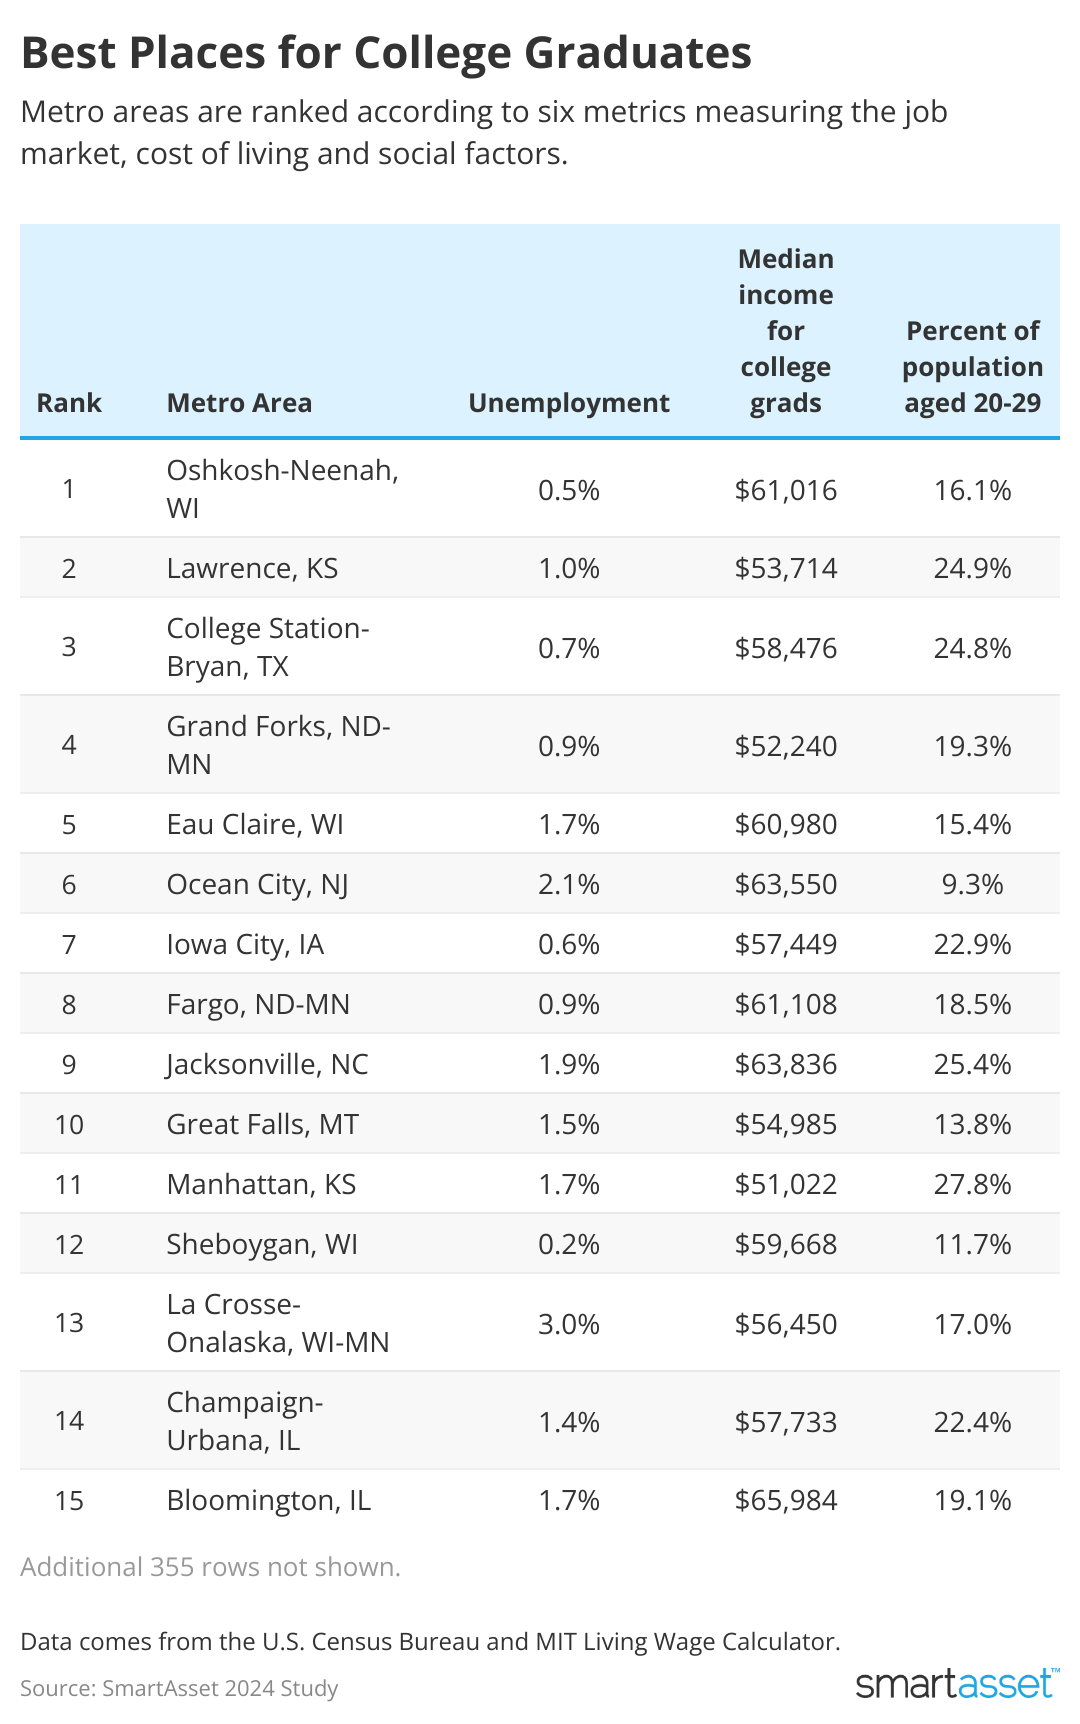 Table showing best places for college graduates.